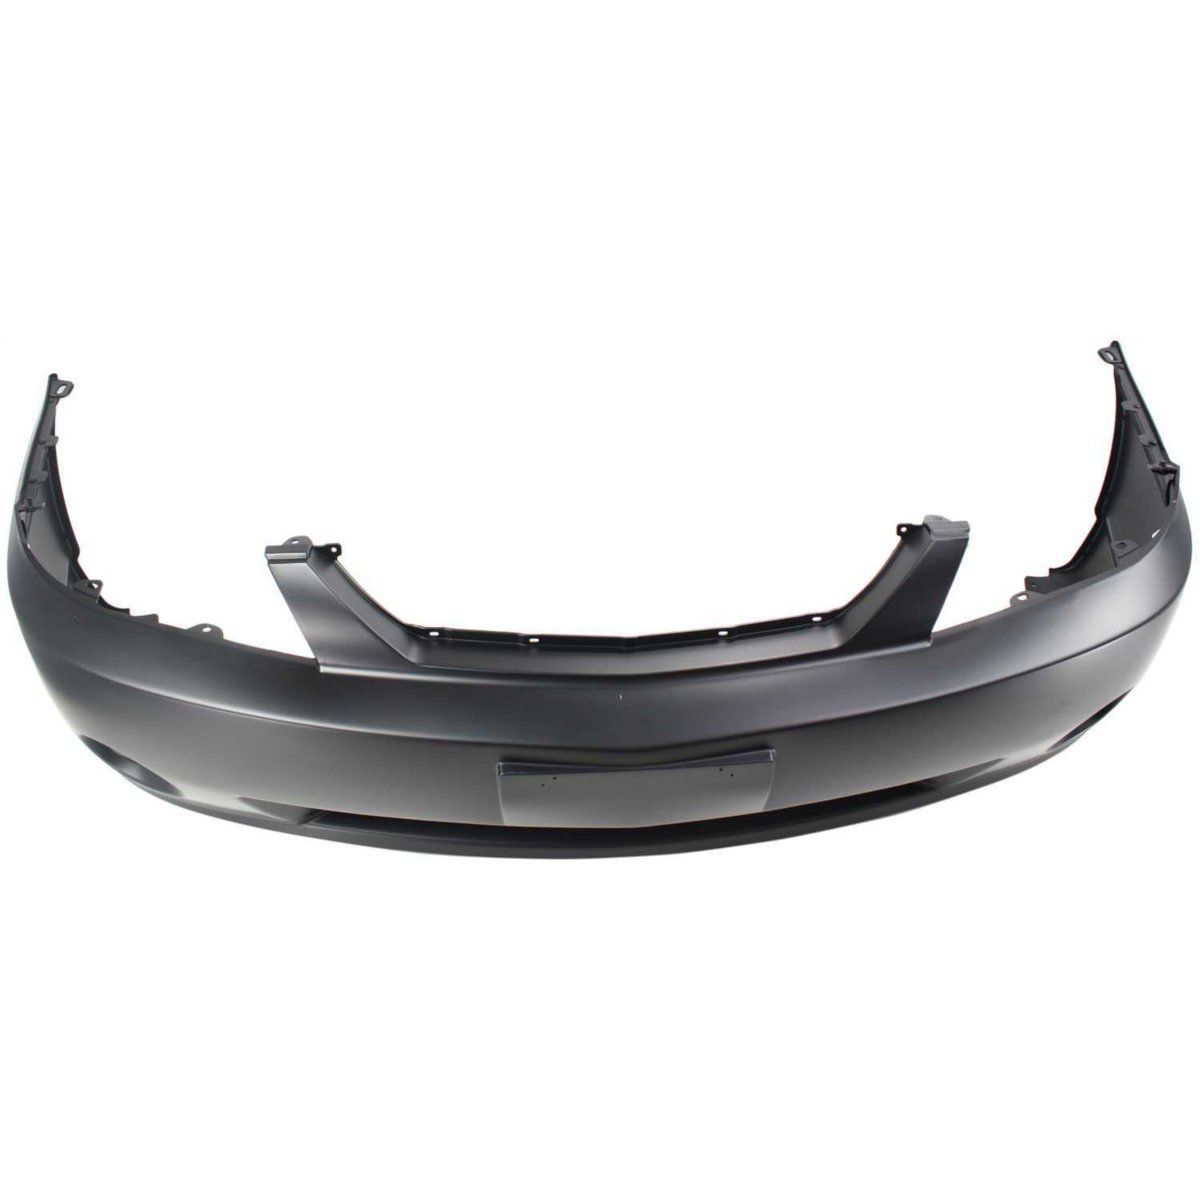 2002-2004 KIA SPECTRA Front Bumper Cover 4dr sedan Painted to Match